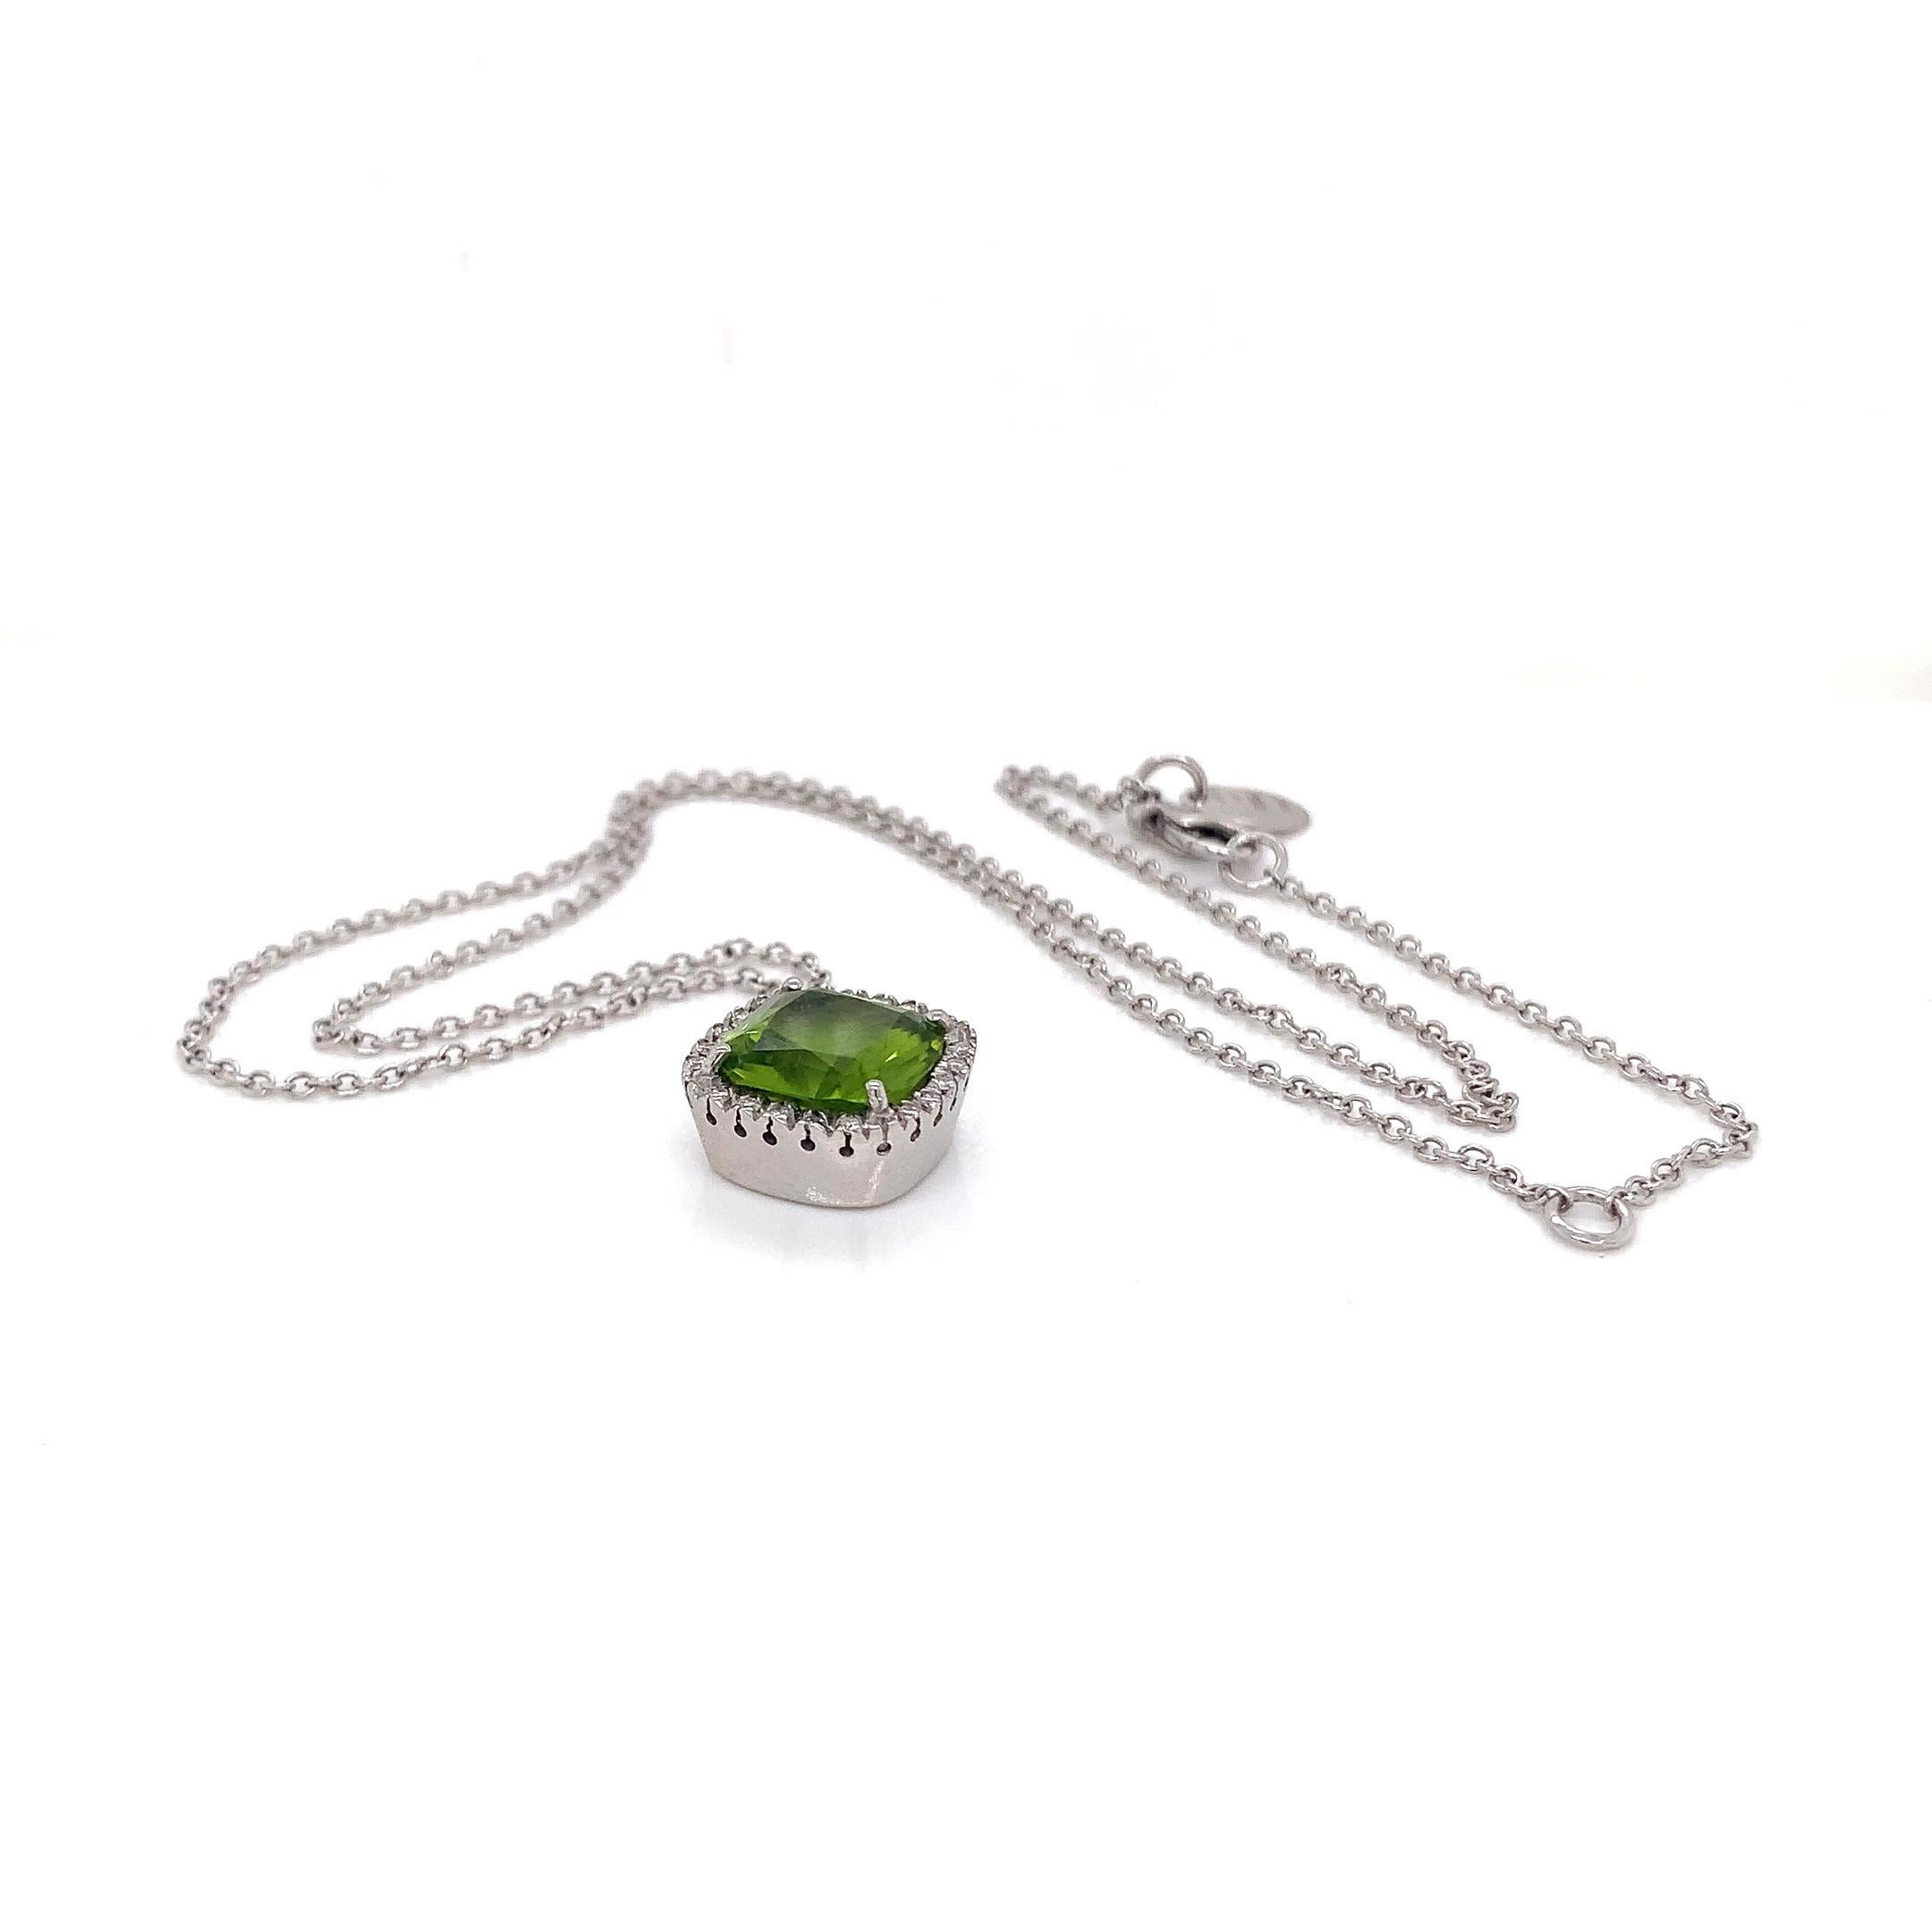 Women's or Men's 18 Karat White Gold Peridot and Diamond Garavelli Pendant with Necklace For Sale